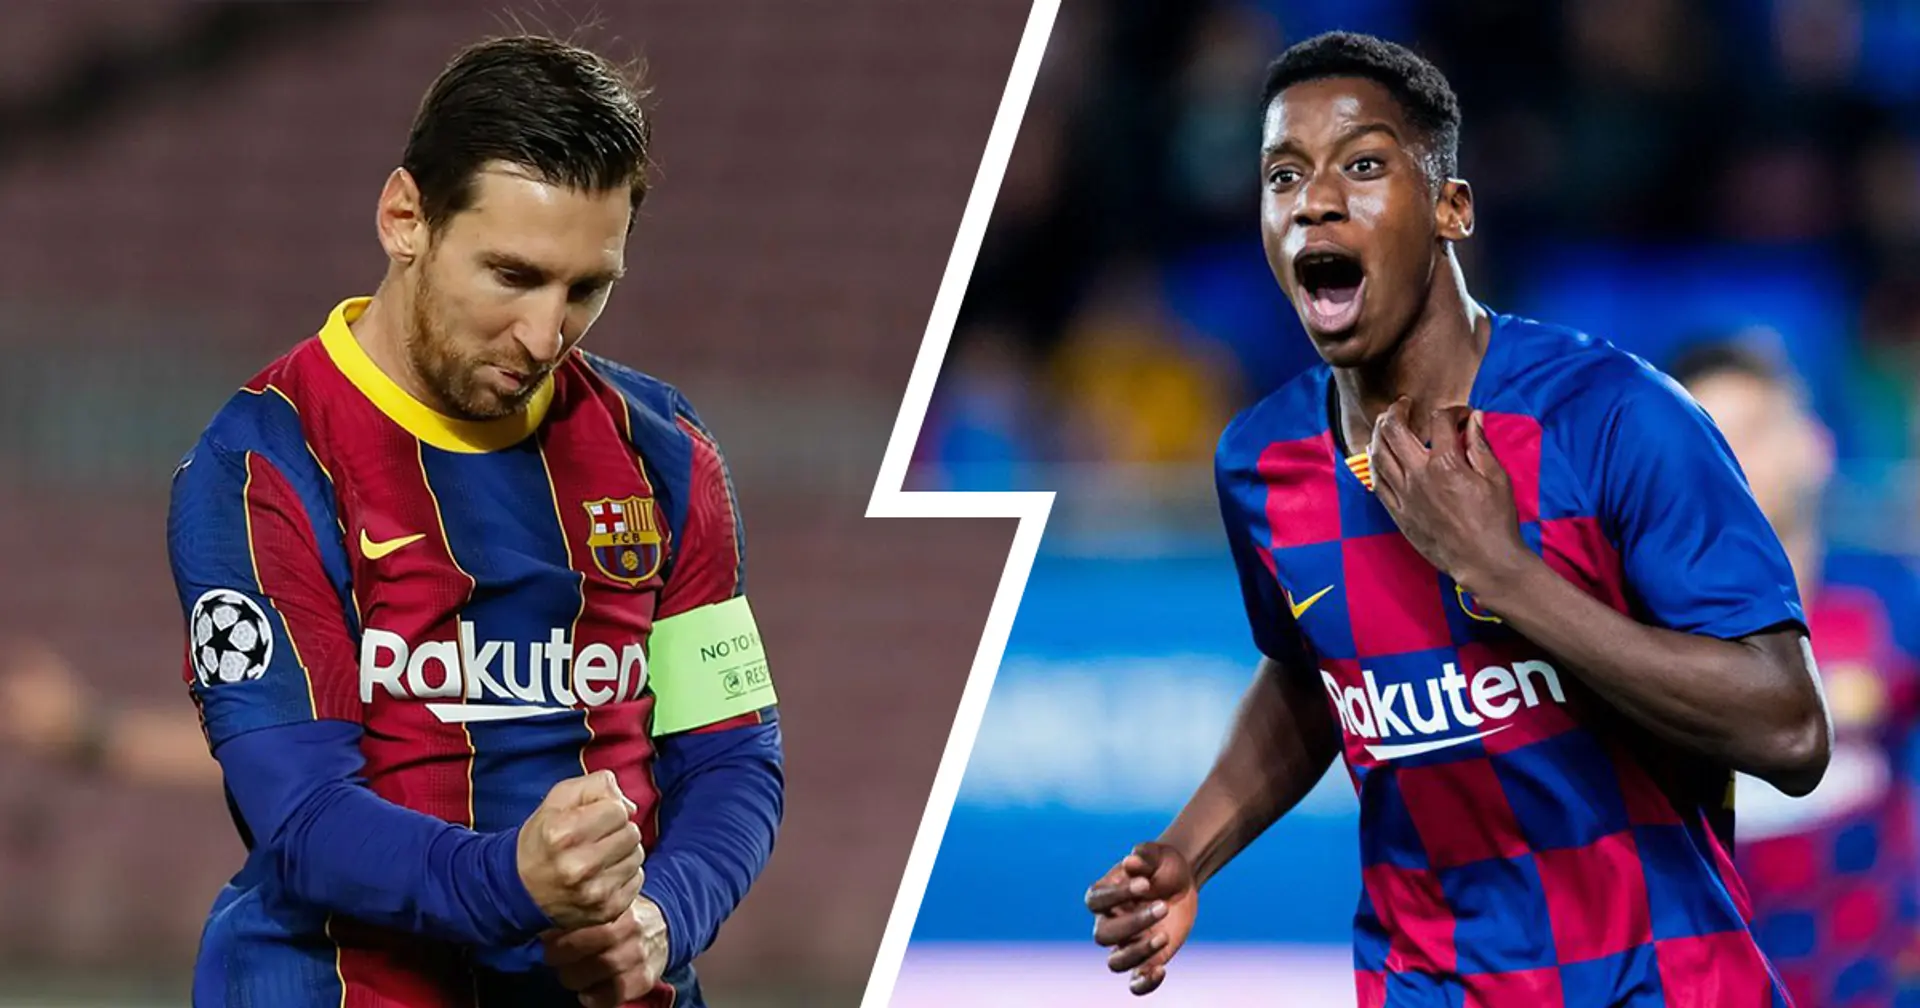 New contracts for Messi and Ilaix Moriba will reportedly be next president's priority